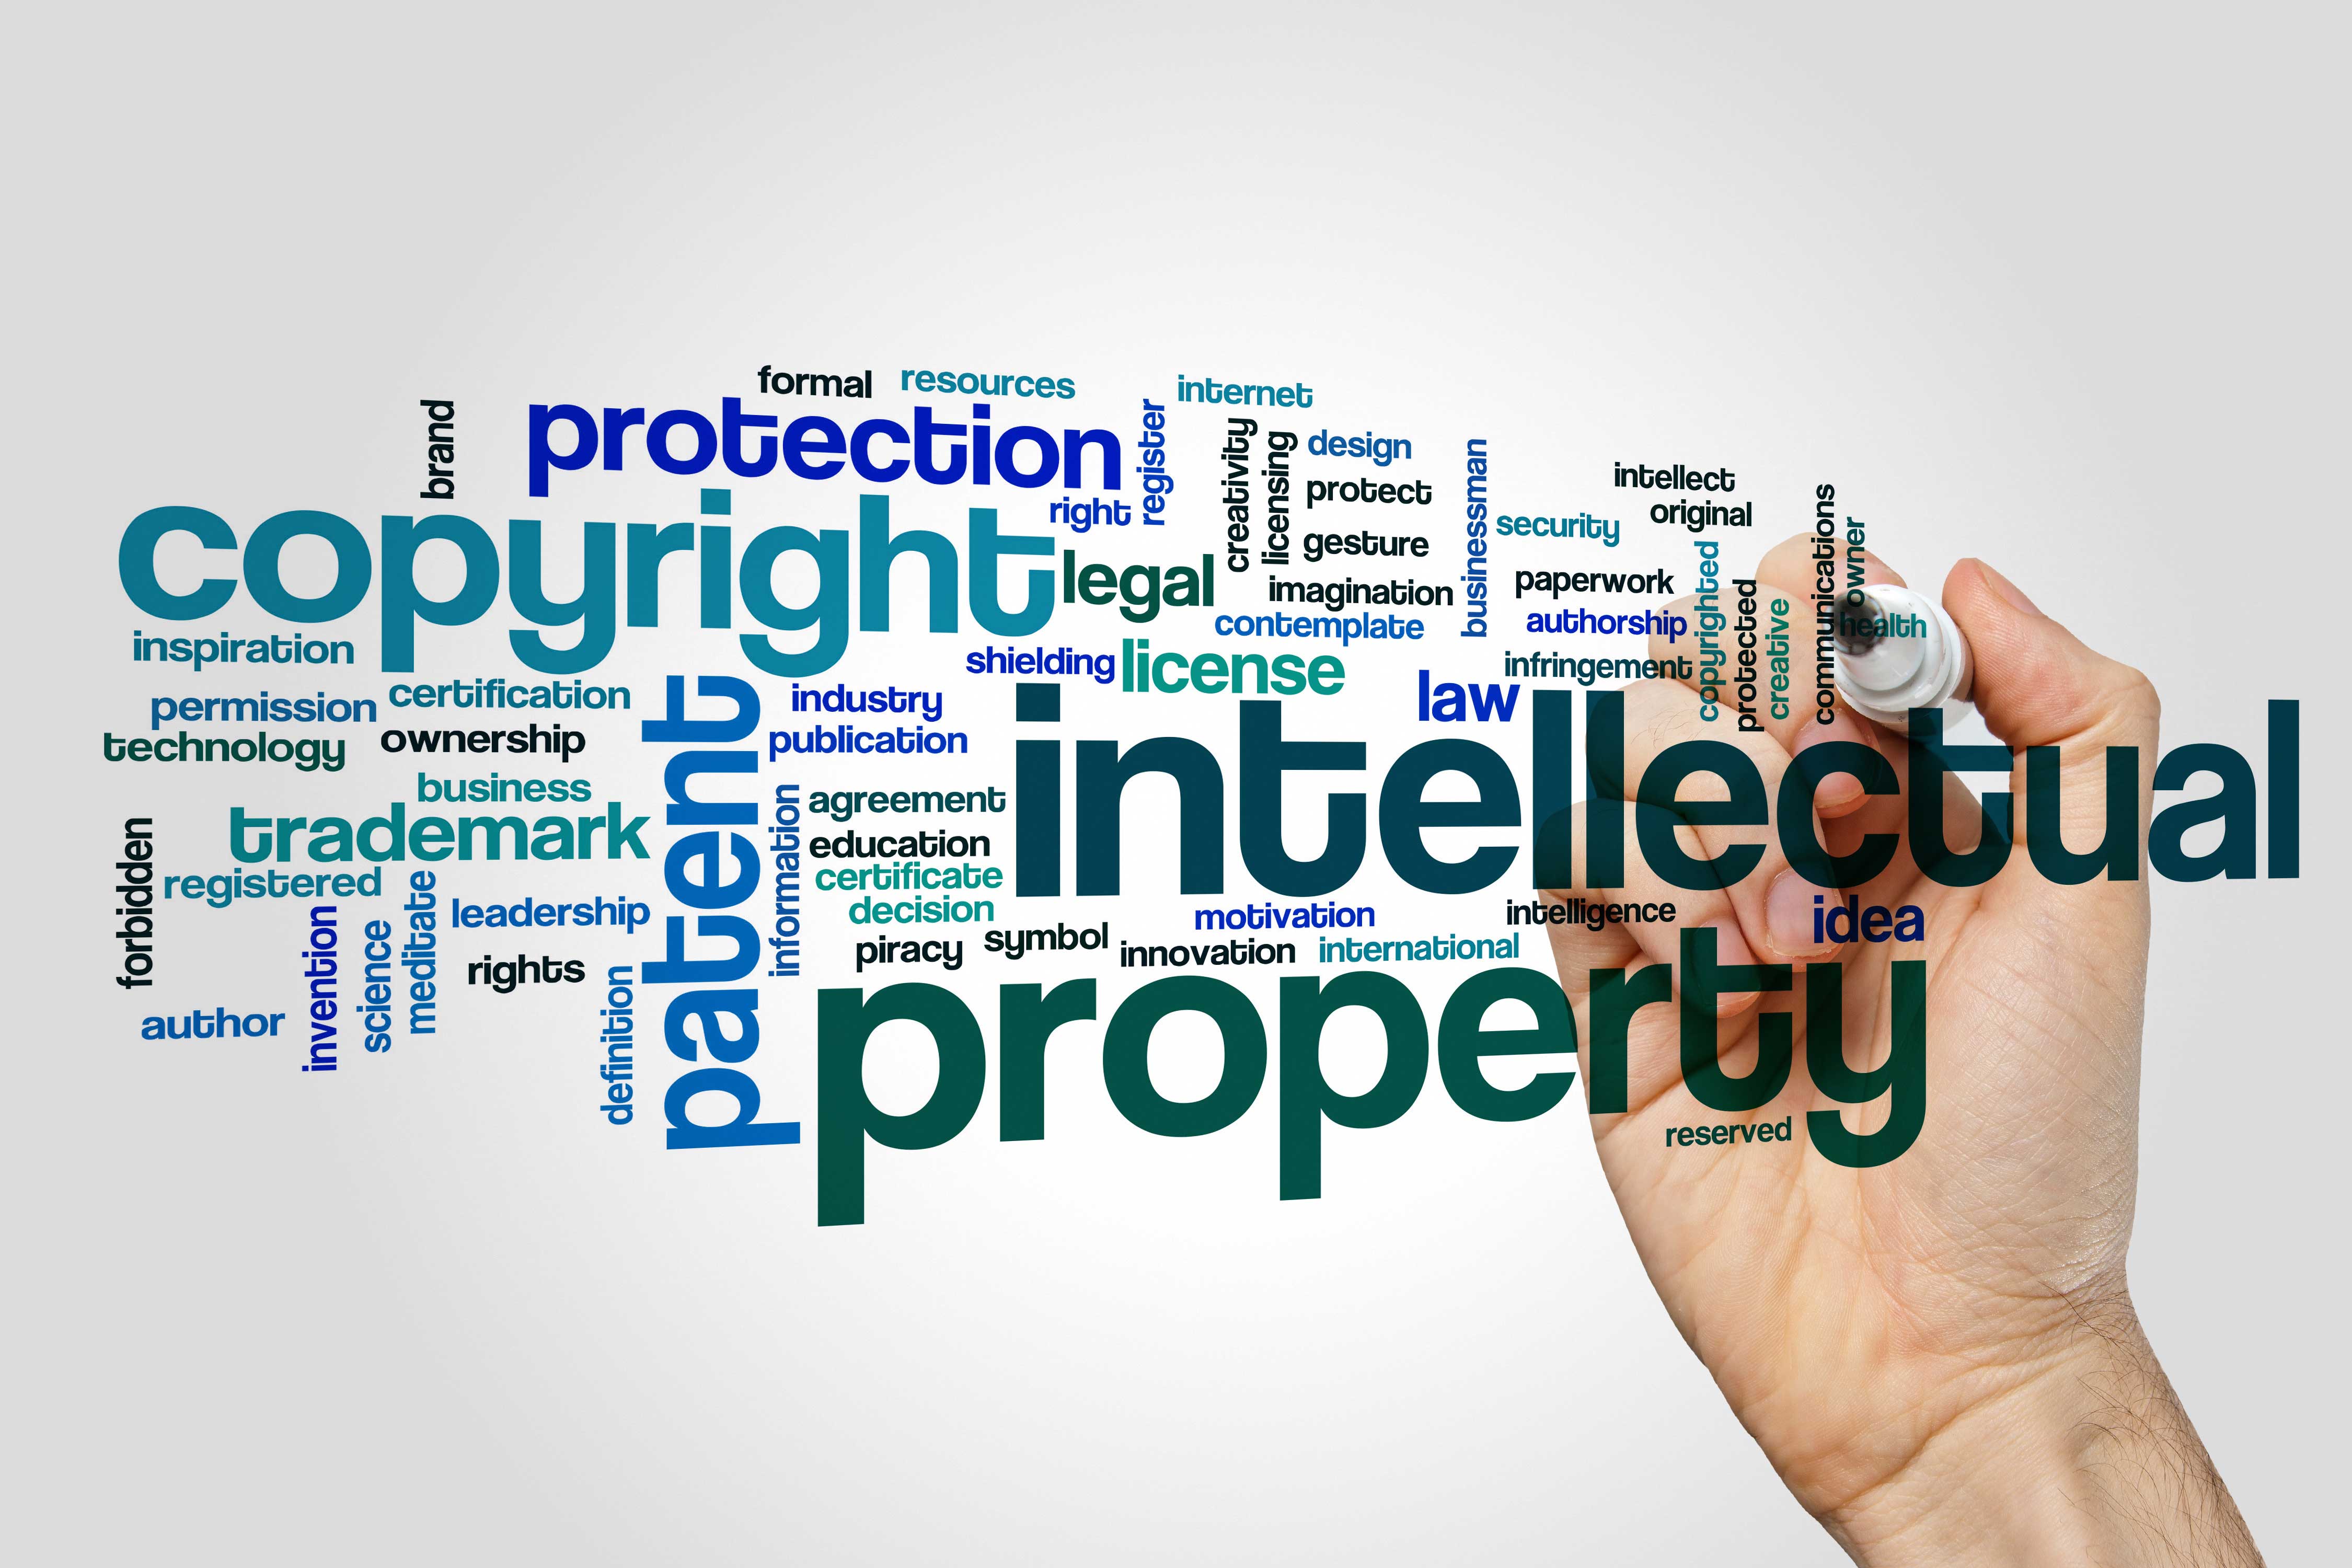 thesis topics on intellectual property rights